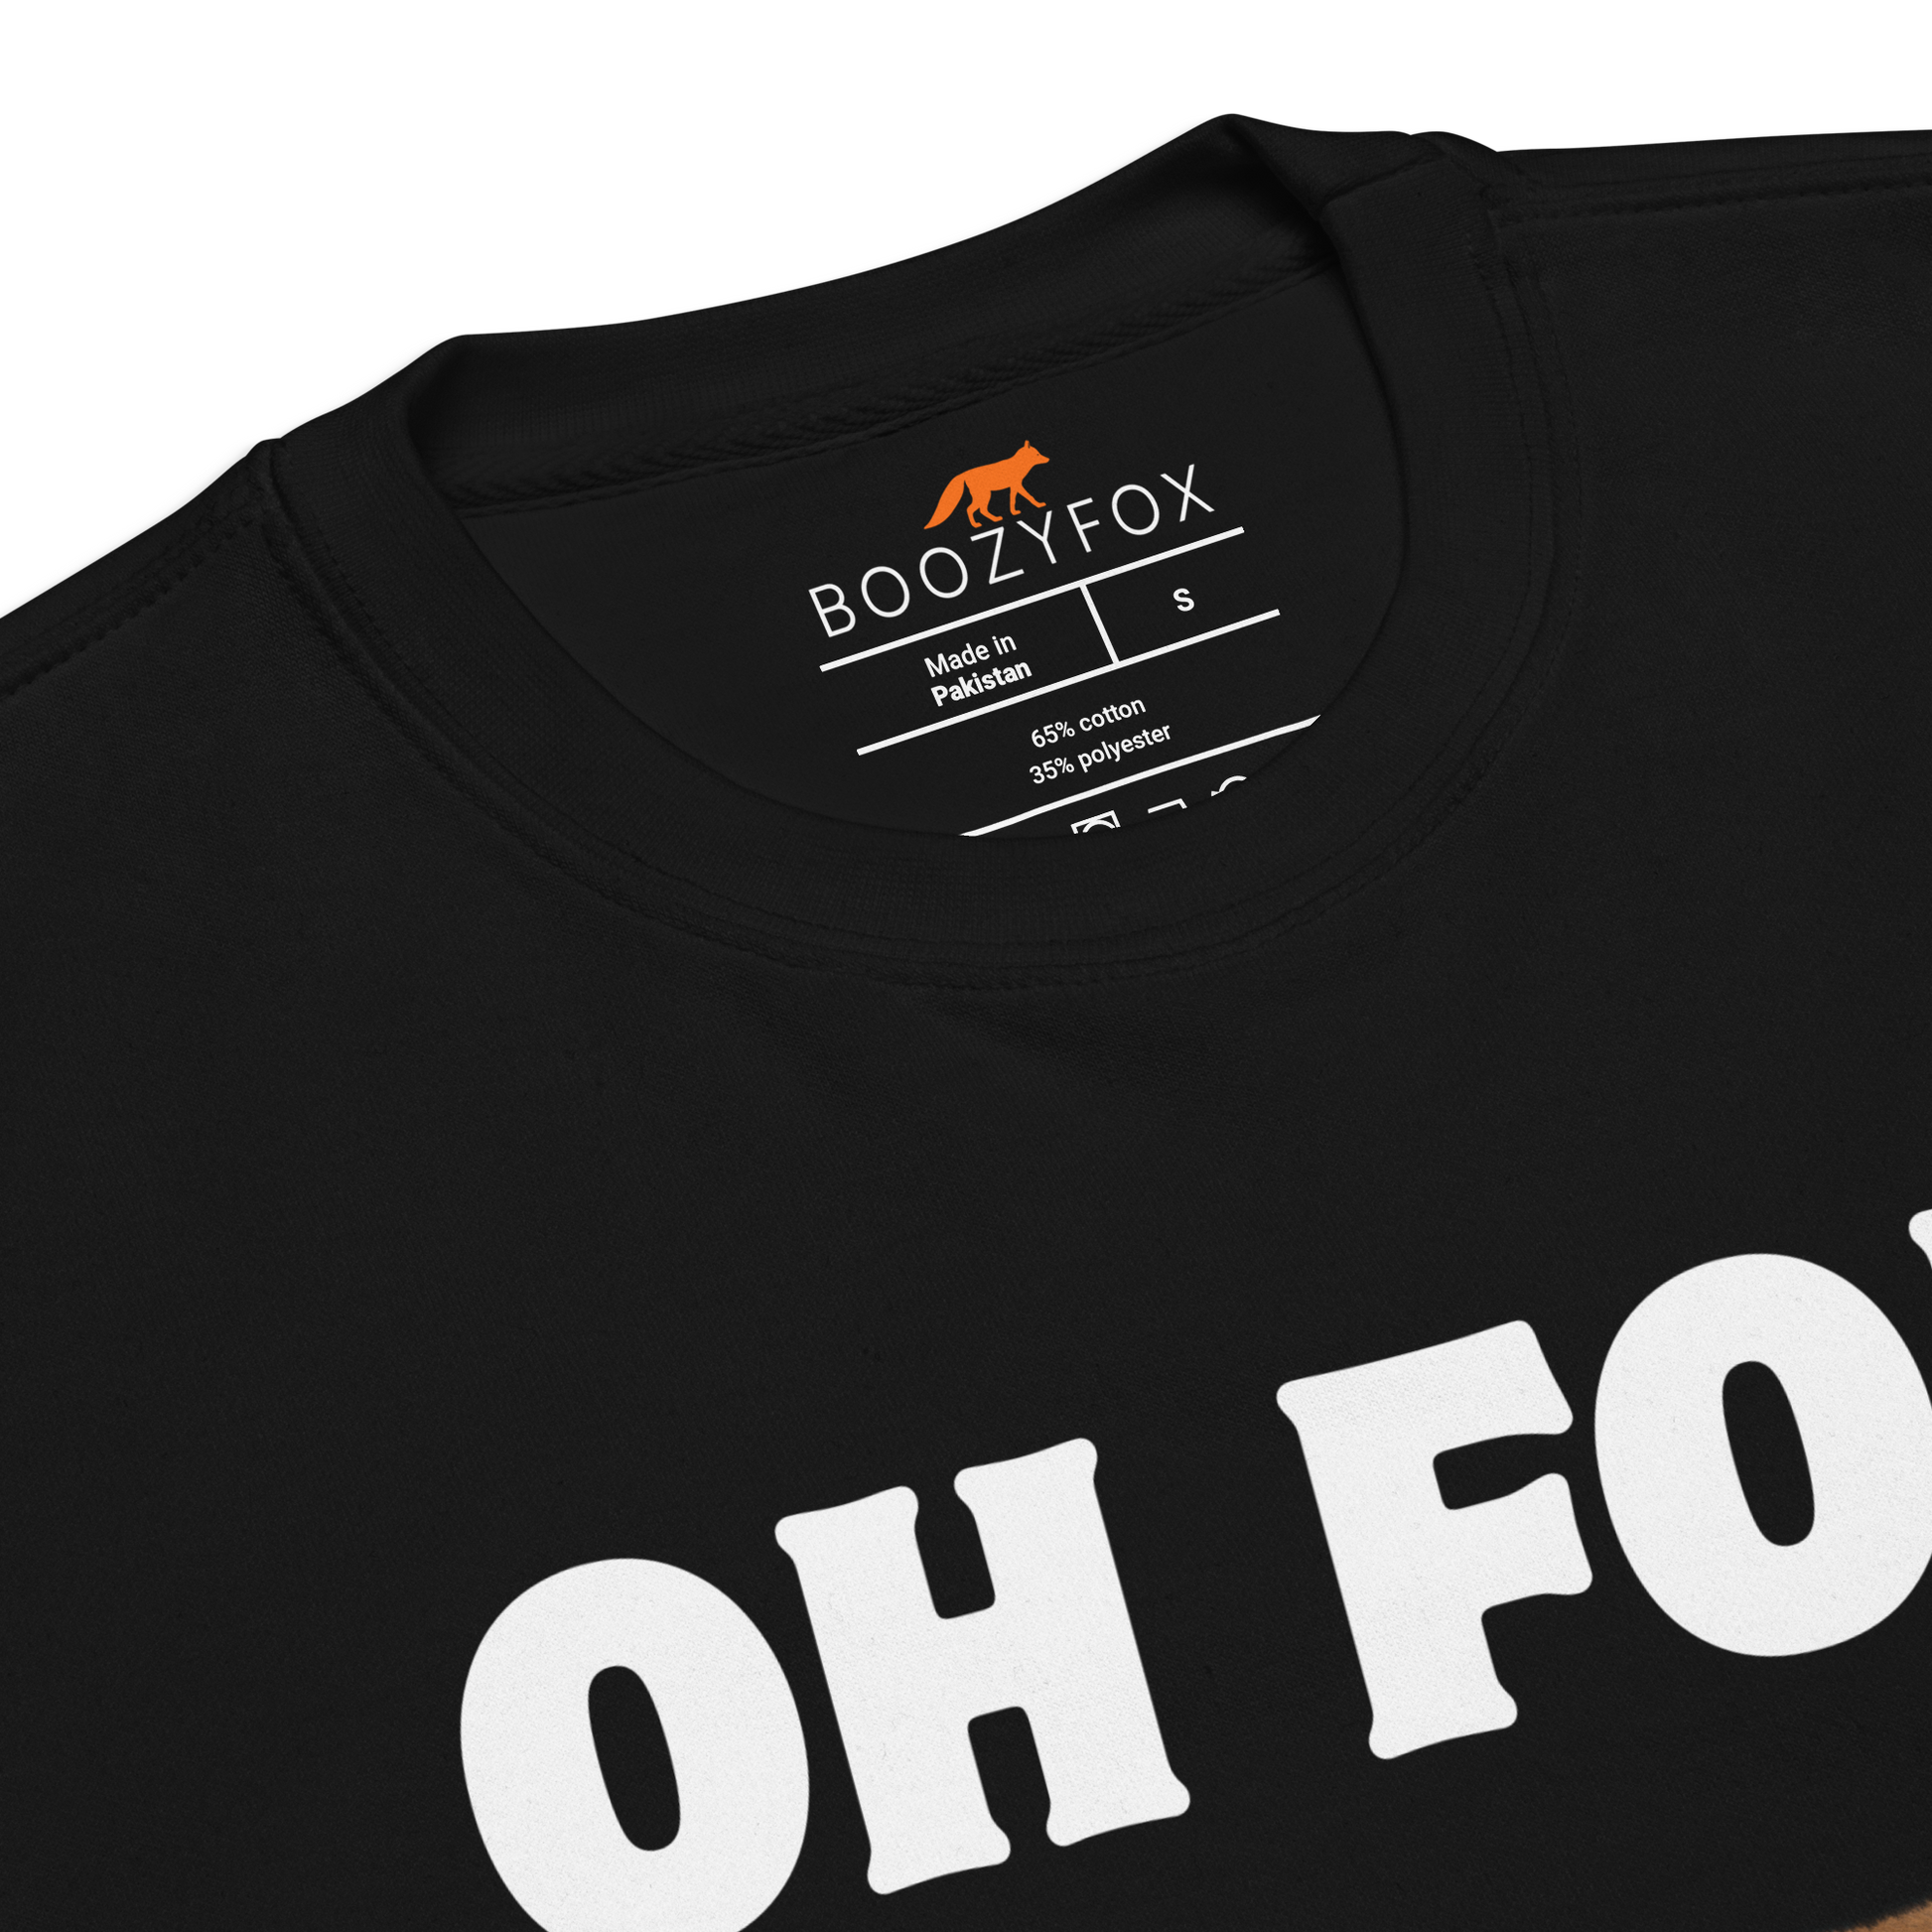 Product details of a Black Premium Fox Sweatshirt featuring a Oh For Fox Sake graphic on the chest - Funny Graphic Fox Sweatshirts - Boozy Fox